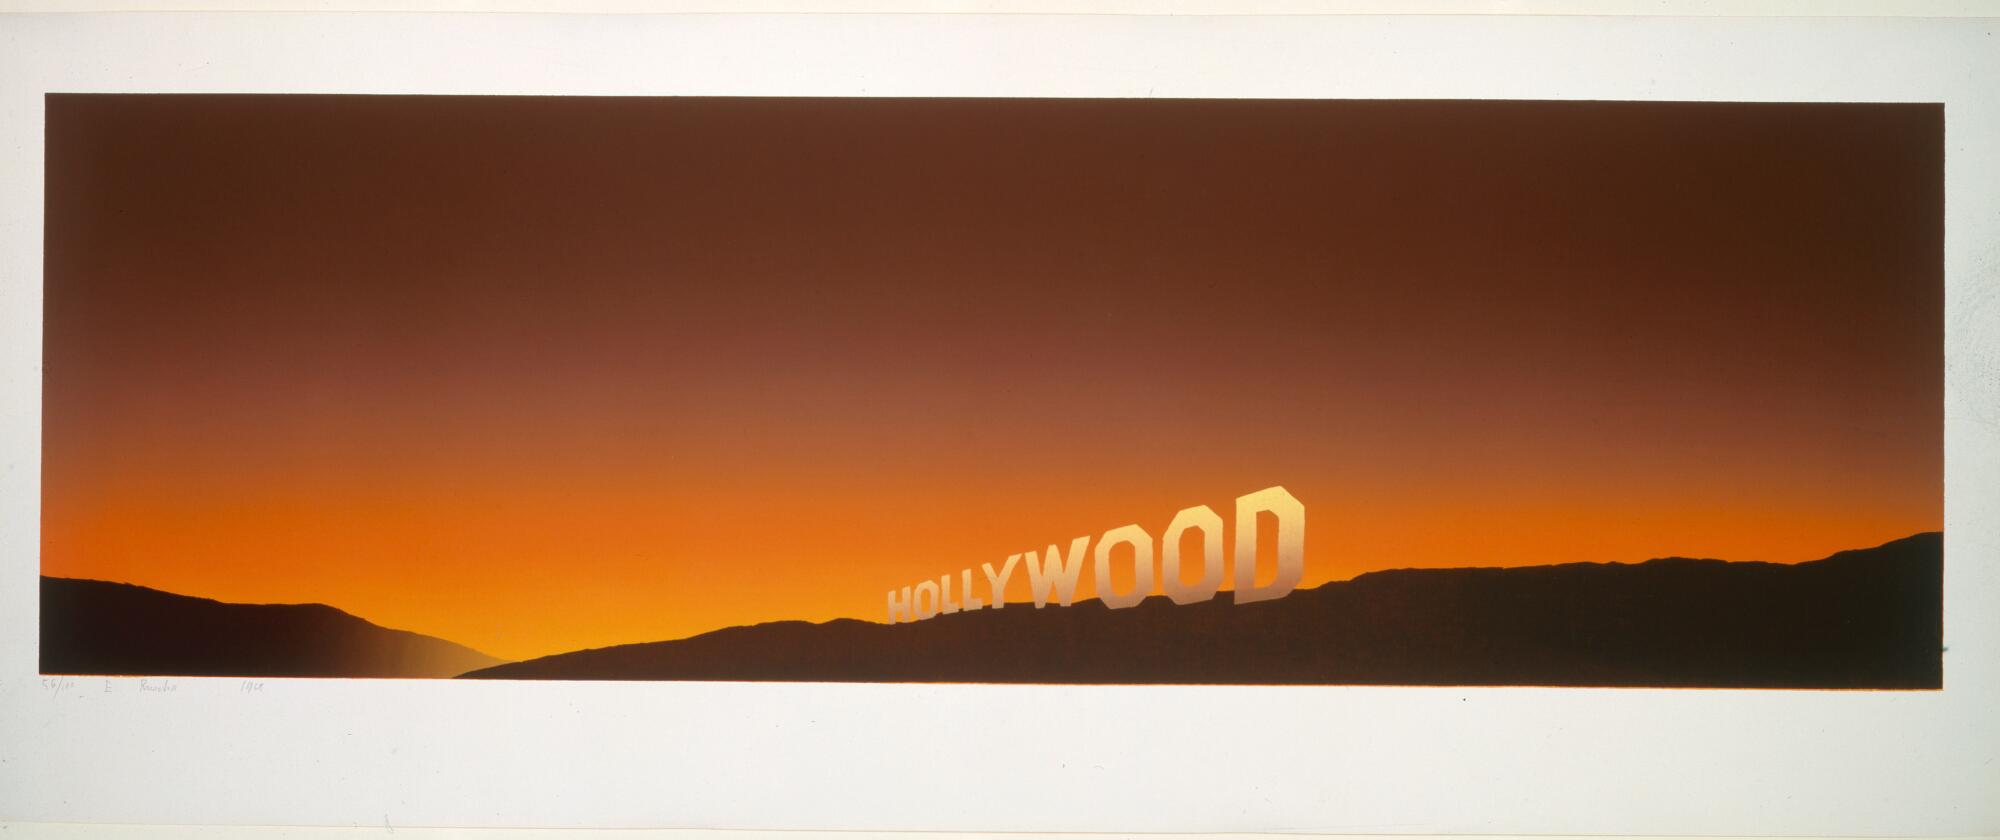 Hollywood-Schild Ed Ruscha, Hollywood, 1968, Los Angeles County Museum of Art, Museum Acquisition Fund, © Ed Ruscha, Foto